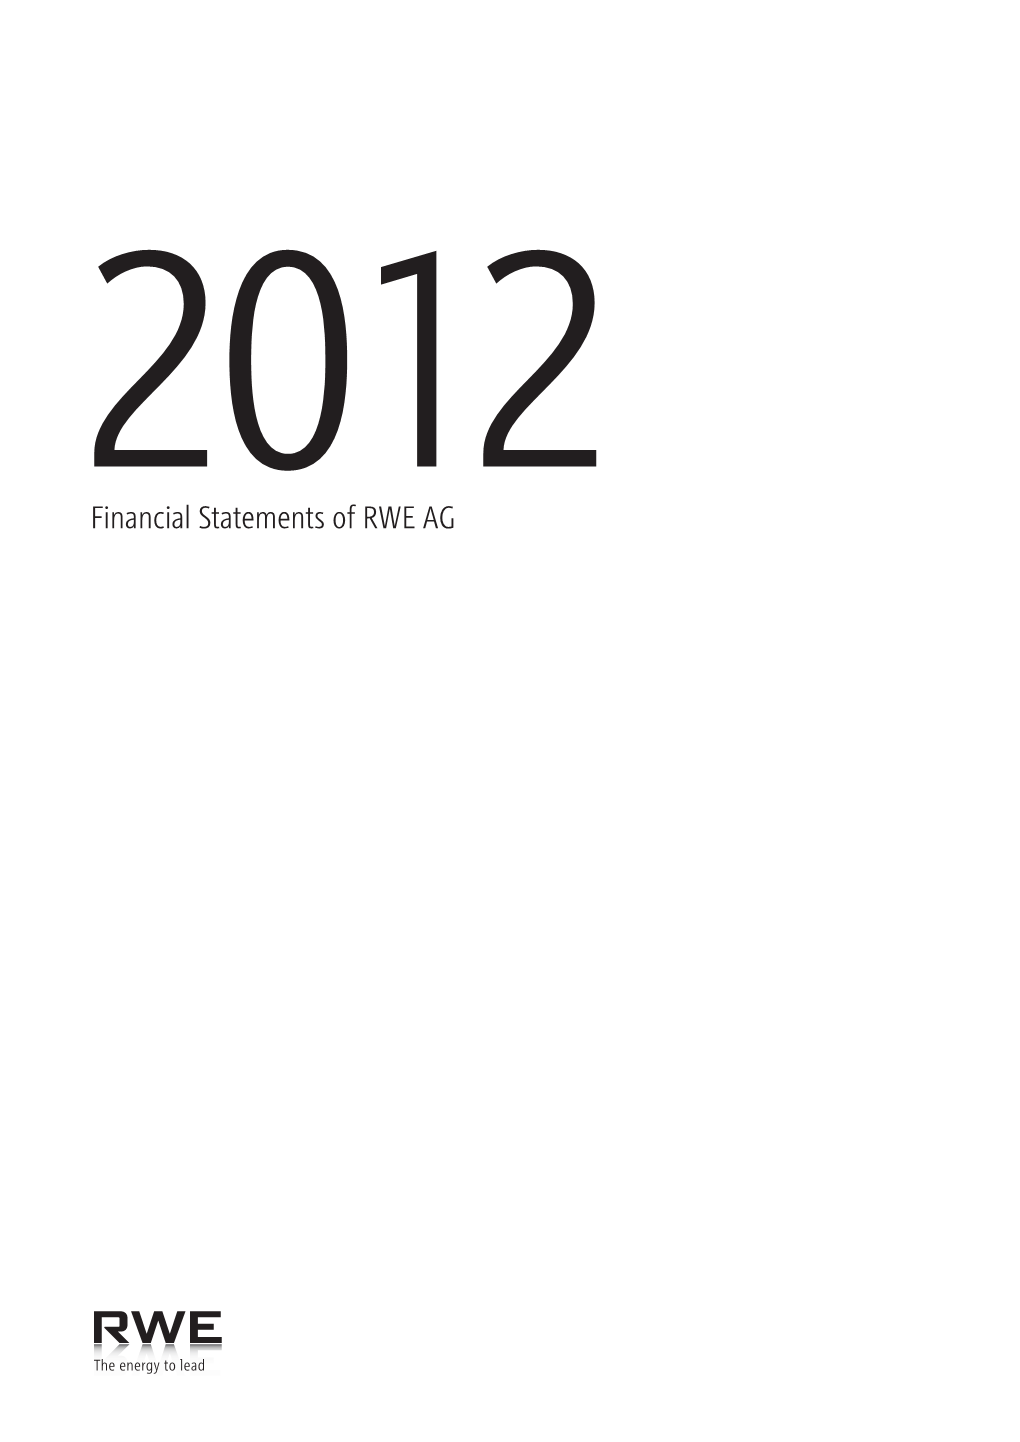 Financial Statements of RWE AG 2012